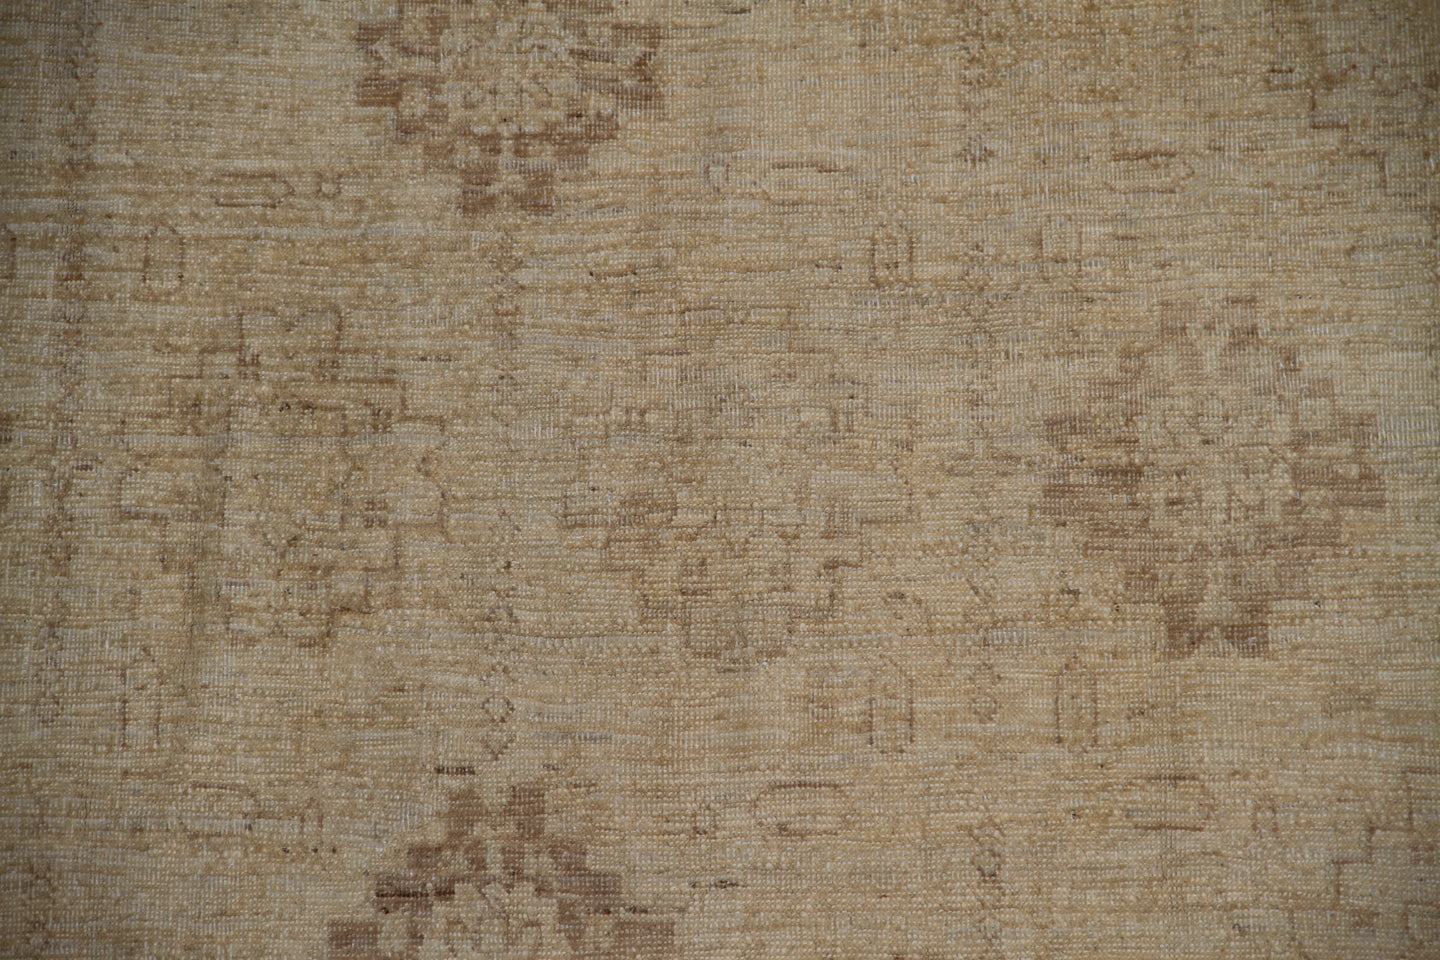 5'x6' Soft Washed-out Colors Contemporary Ariana Vintage Collection Rug